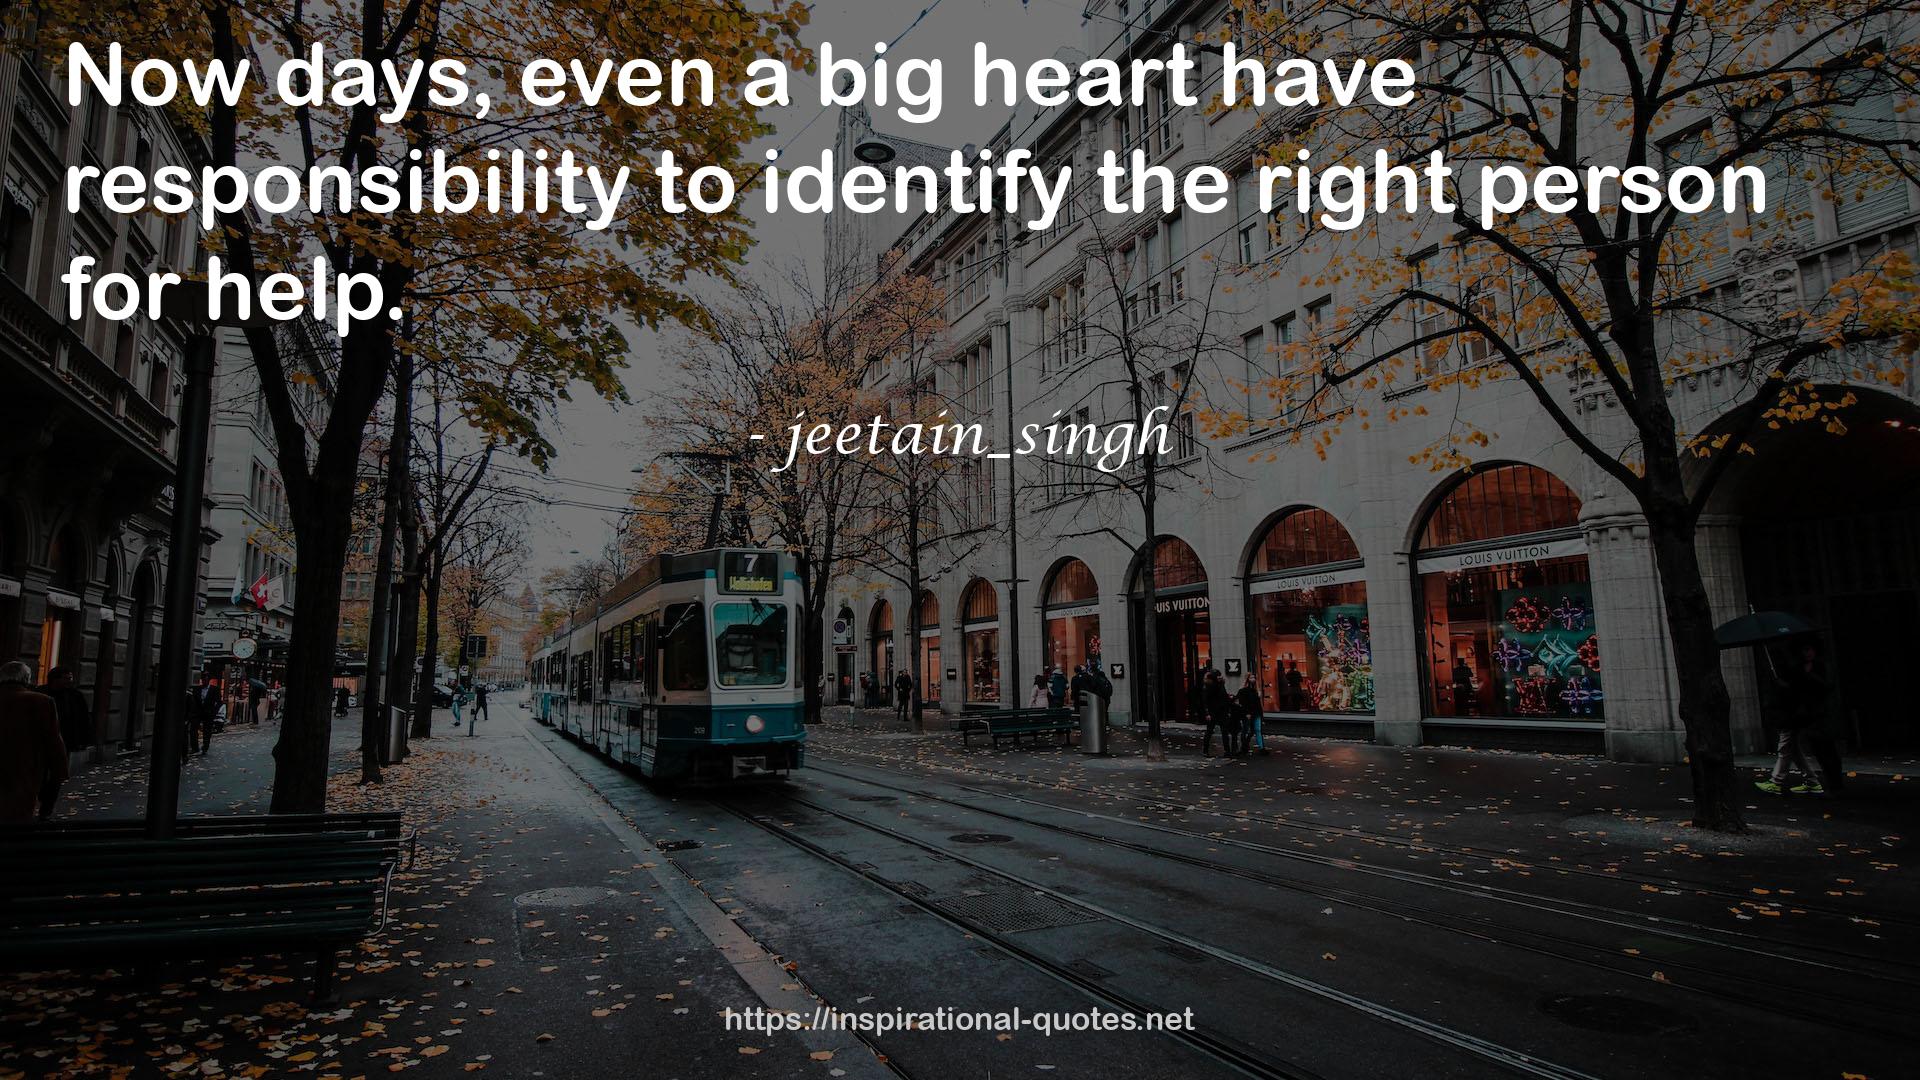 jeetain_singh QUOTES